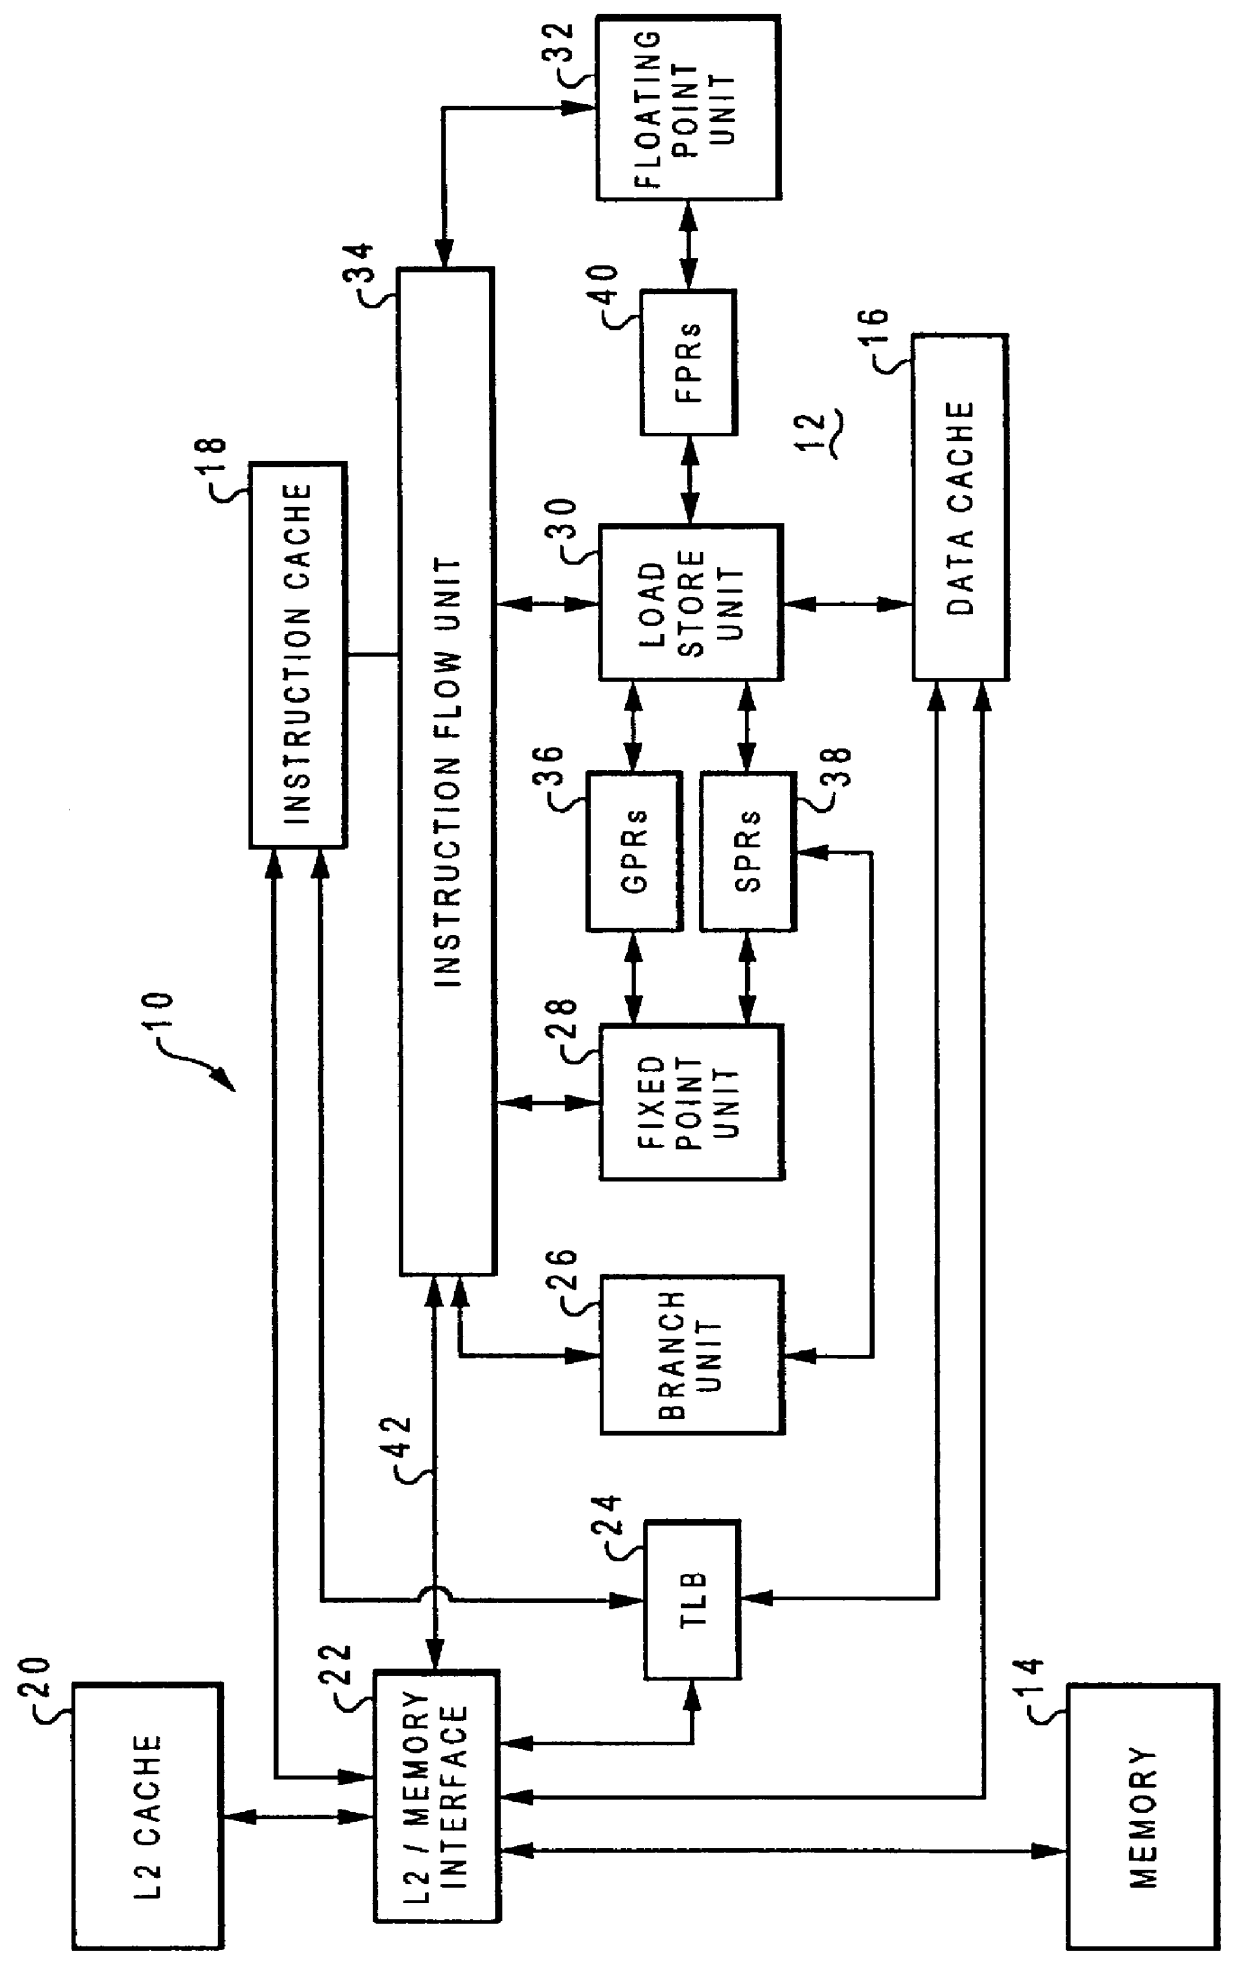 Method and system for multi-thread switching only when a cache miss occurs at a second or higher level